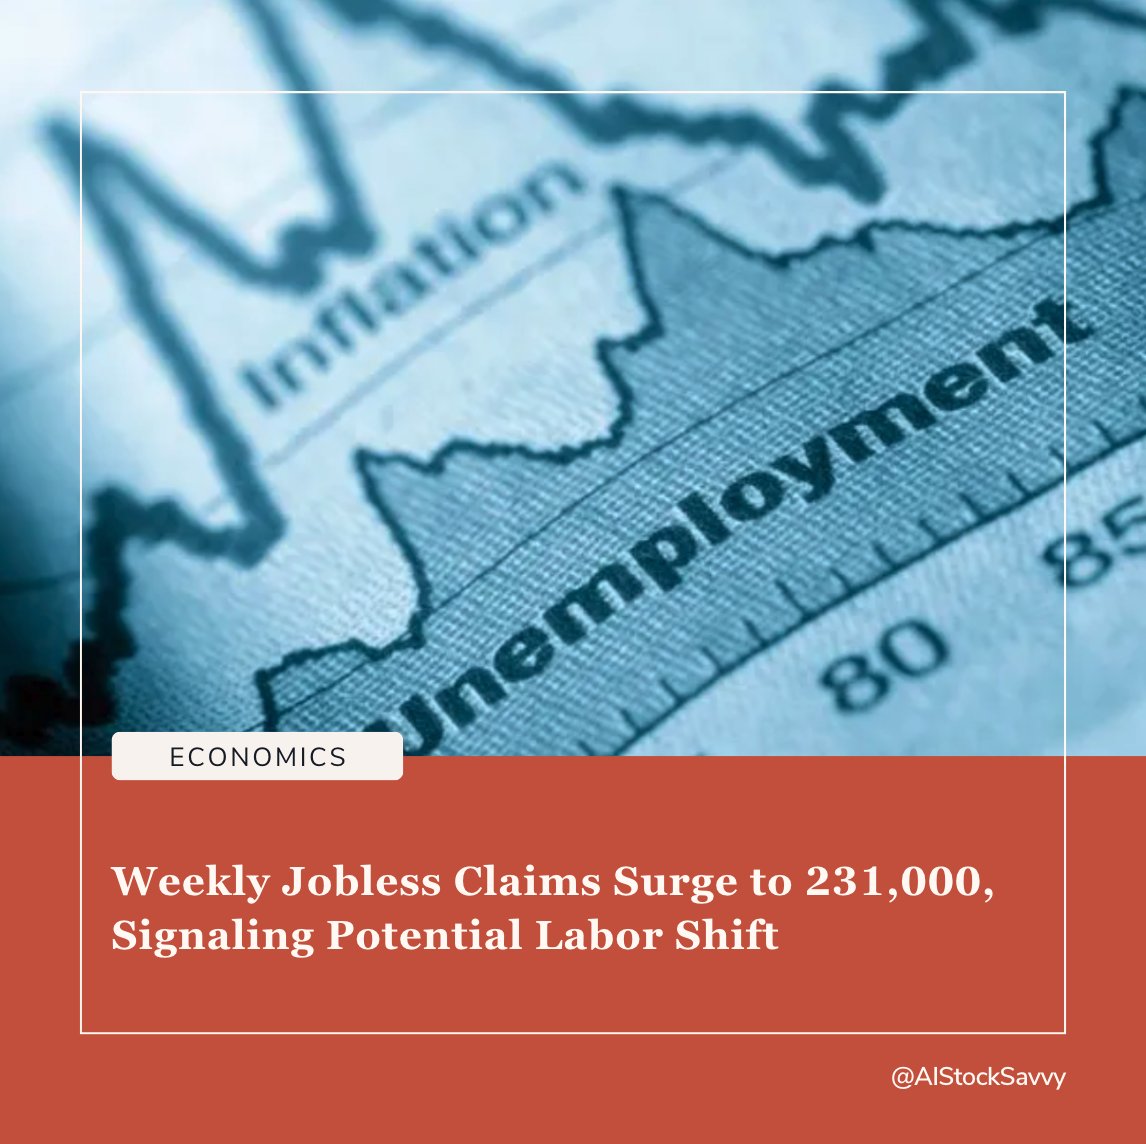 📣 JUST IN: U.S. Jobless Claims Hit Eight-Month High at 231,000 📉 #Economy #LaborMarket

👉 Key Highlights:

📍 Weekly jobless claims jump to 231,000 v/s 214,000 expected , highest since August 2023.

📍 Claims rise by 22,000 from the previous week, exceeding expectations.

📍